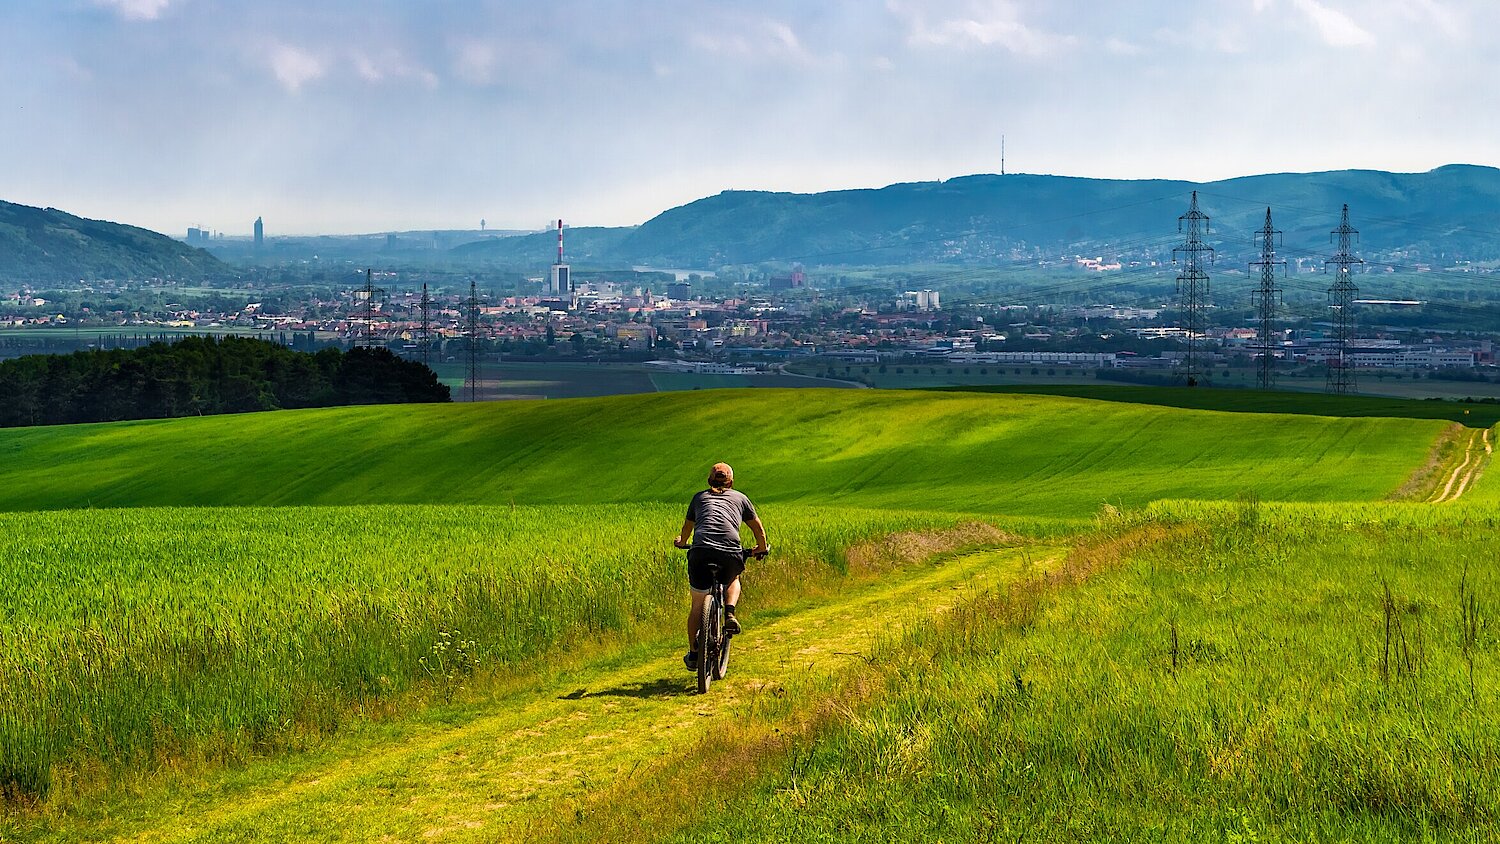 Photograph: Biker on hill in front of a town